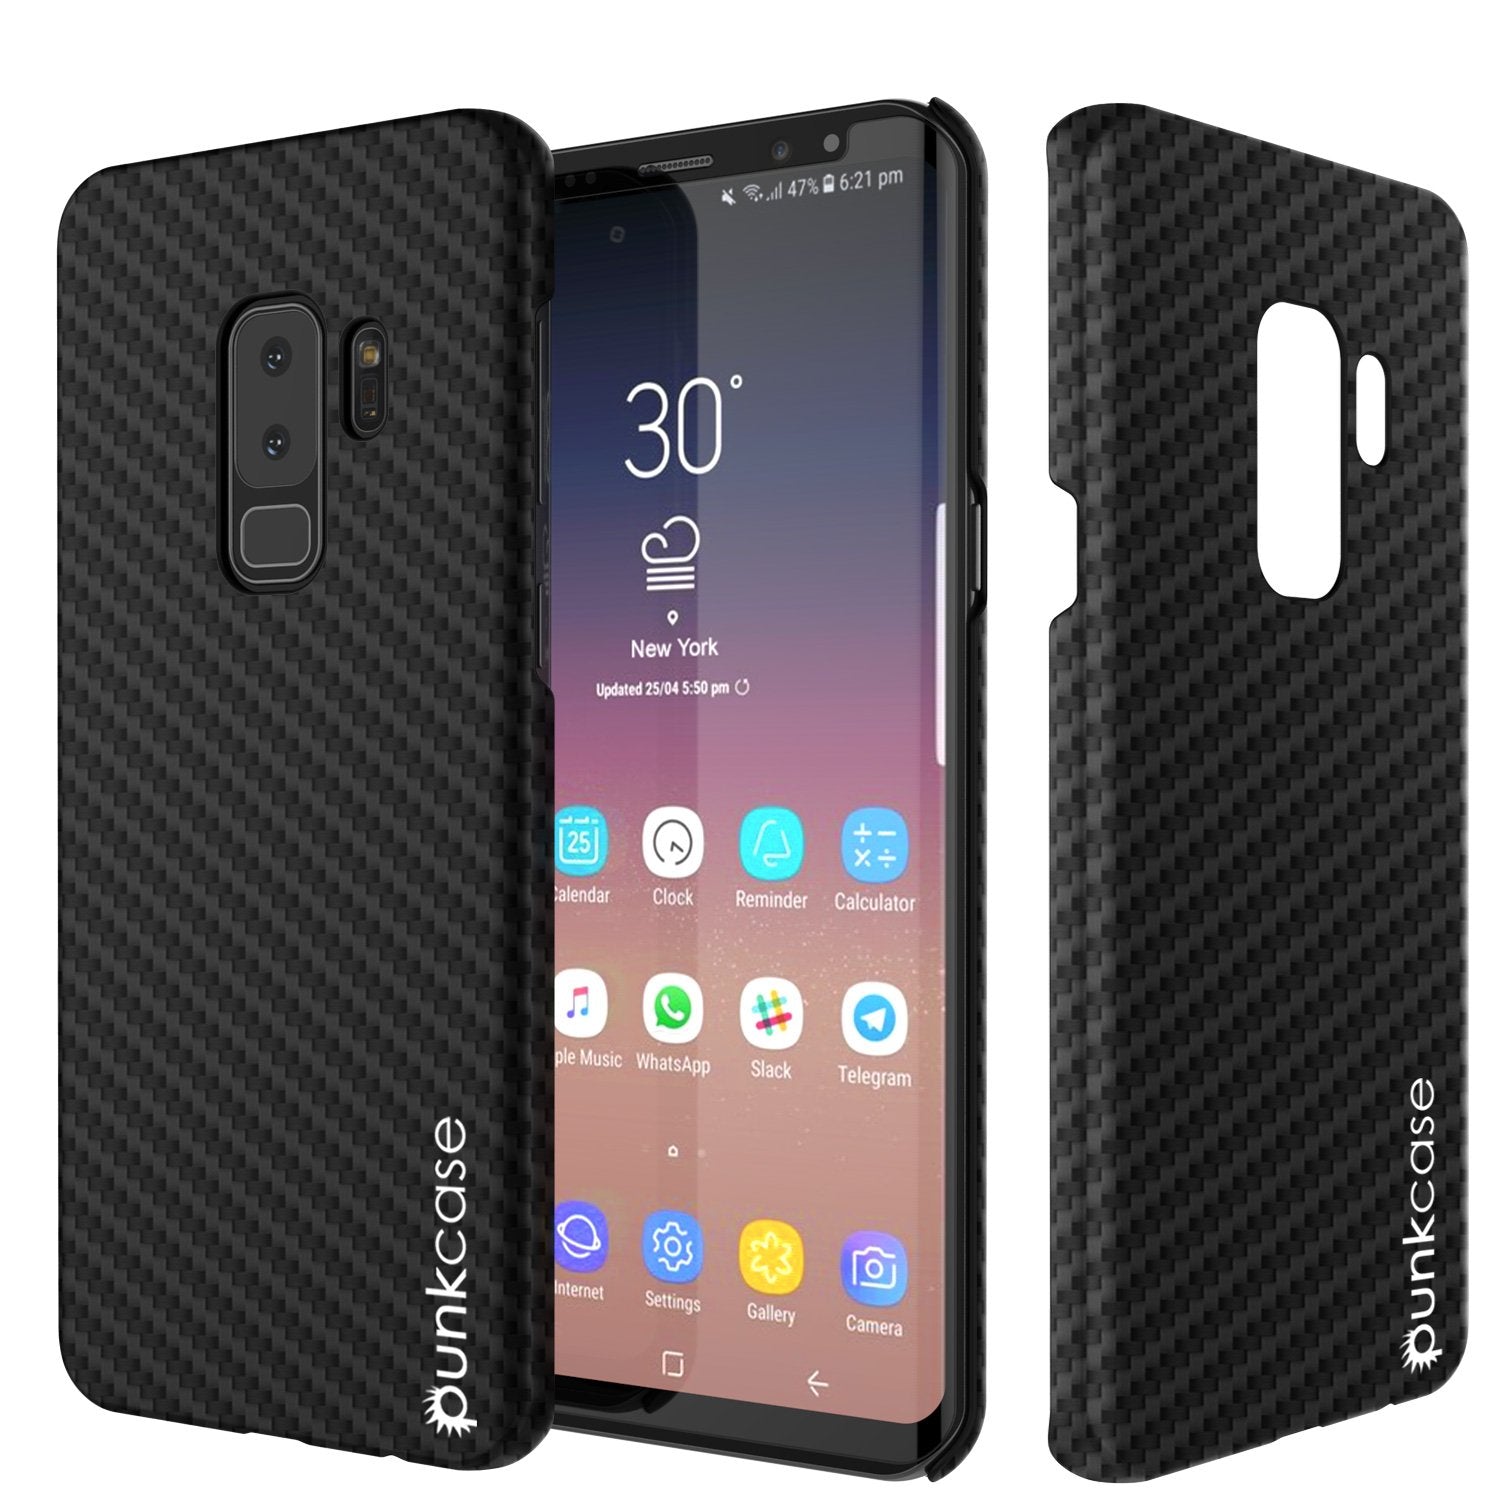 Galaxy S9 Plus Case, Punkcase CarbonShield, Heavy Duty & Ultra Thin 2 Piece Dual Layer PU Leather Cover [shockproof][non slip] with PUNKSHIELD Screen Protector for Samsung S9 Plus [jet black]